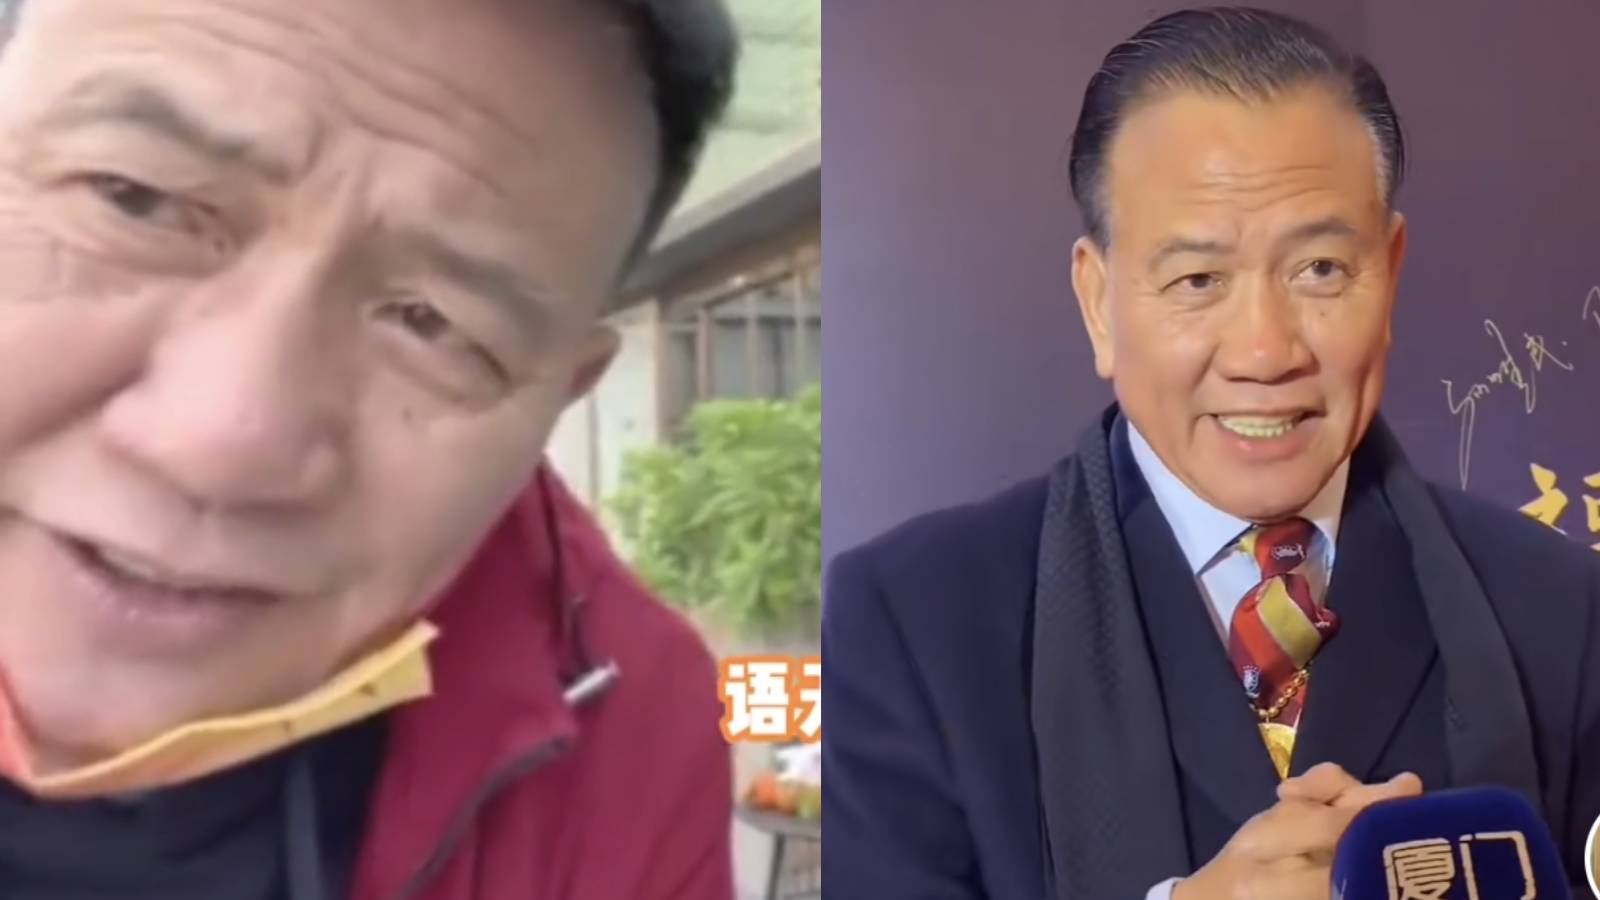 Netizens Suspect Alex Man Is Suffering From Dementia After He Uploads Video Of Him “Talking Incoherently” & Eating Lunch By The Road